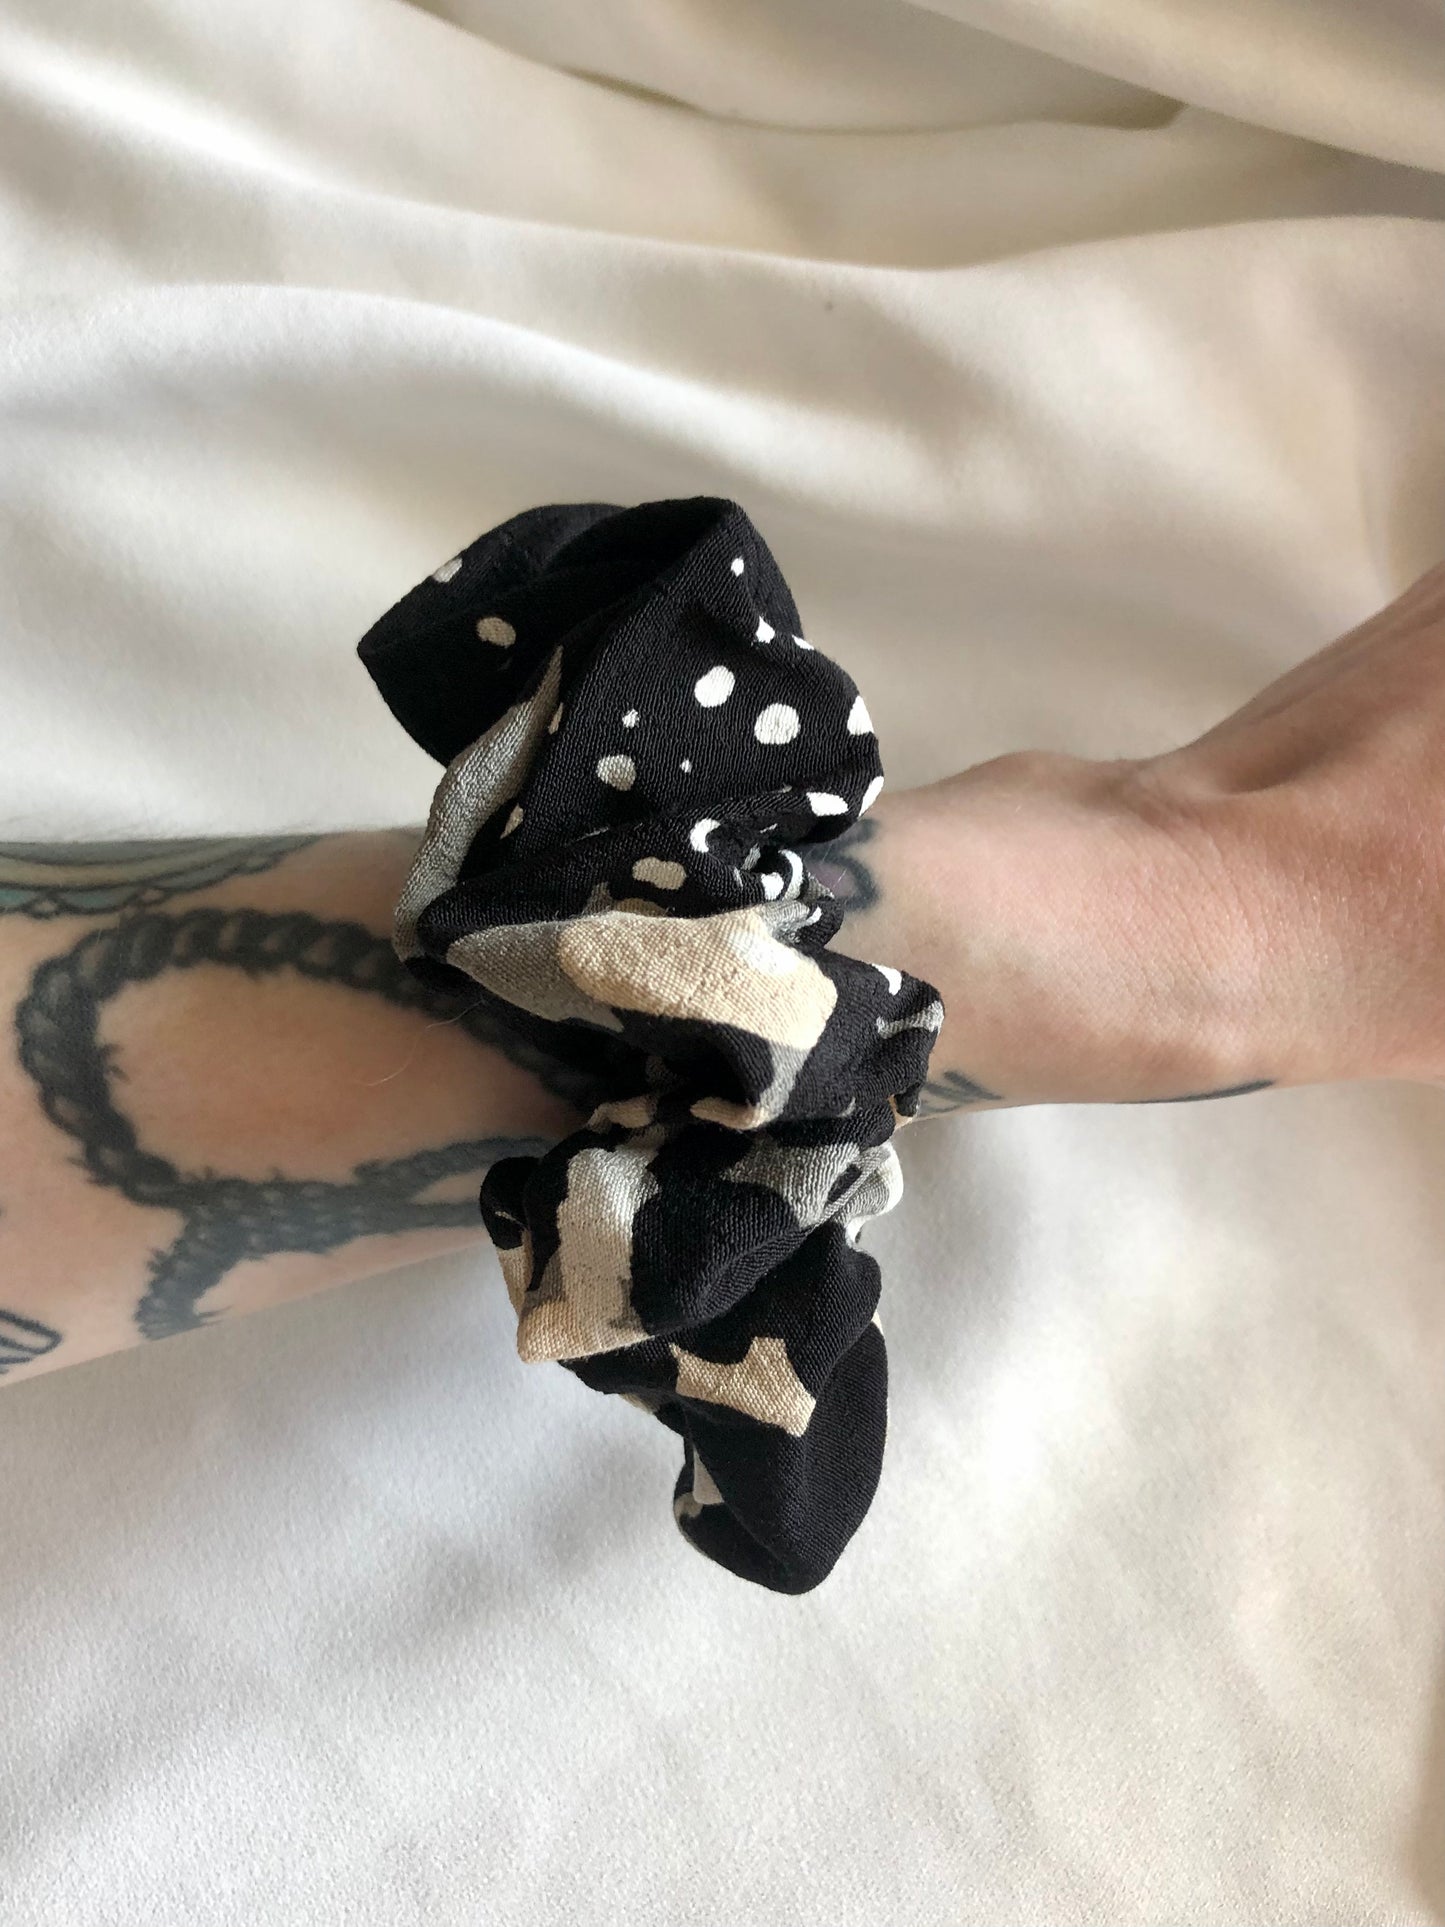 Black and nude scrunchie - choose size